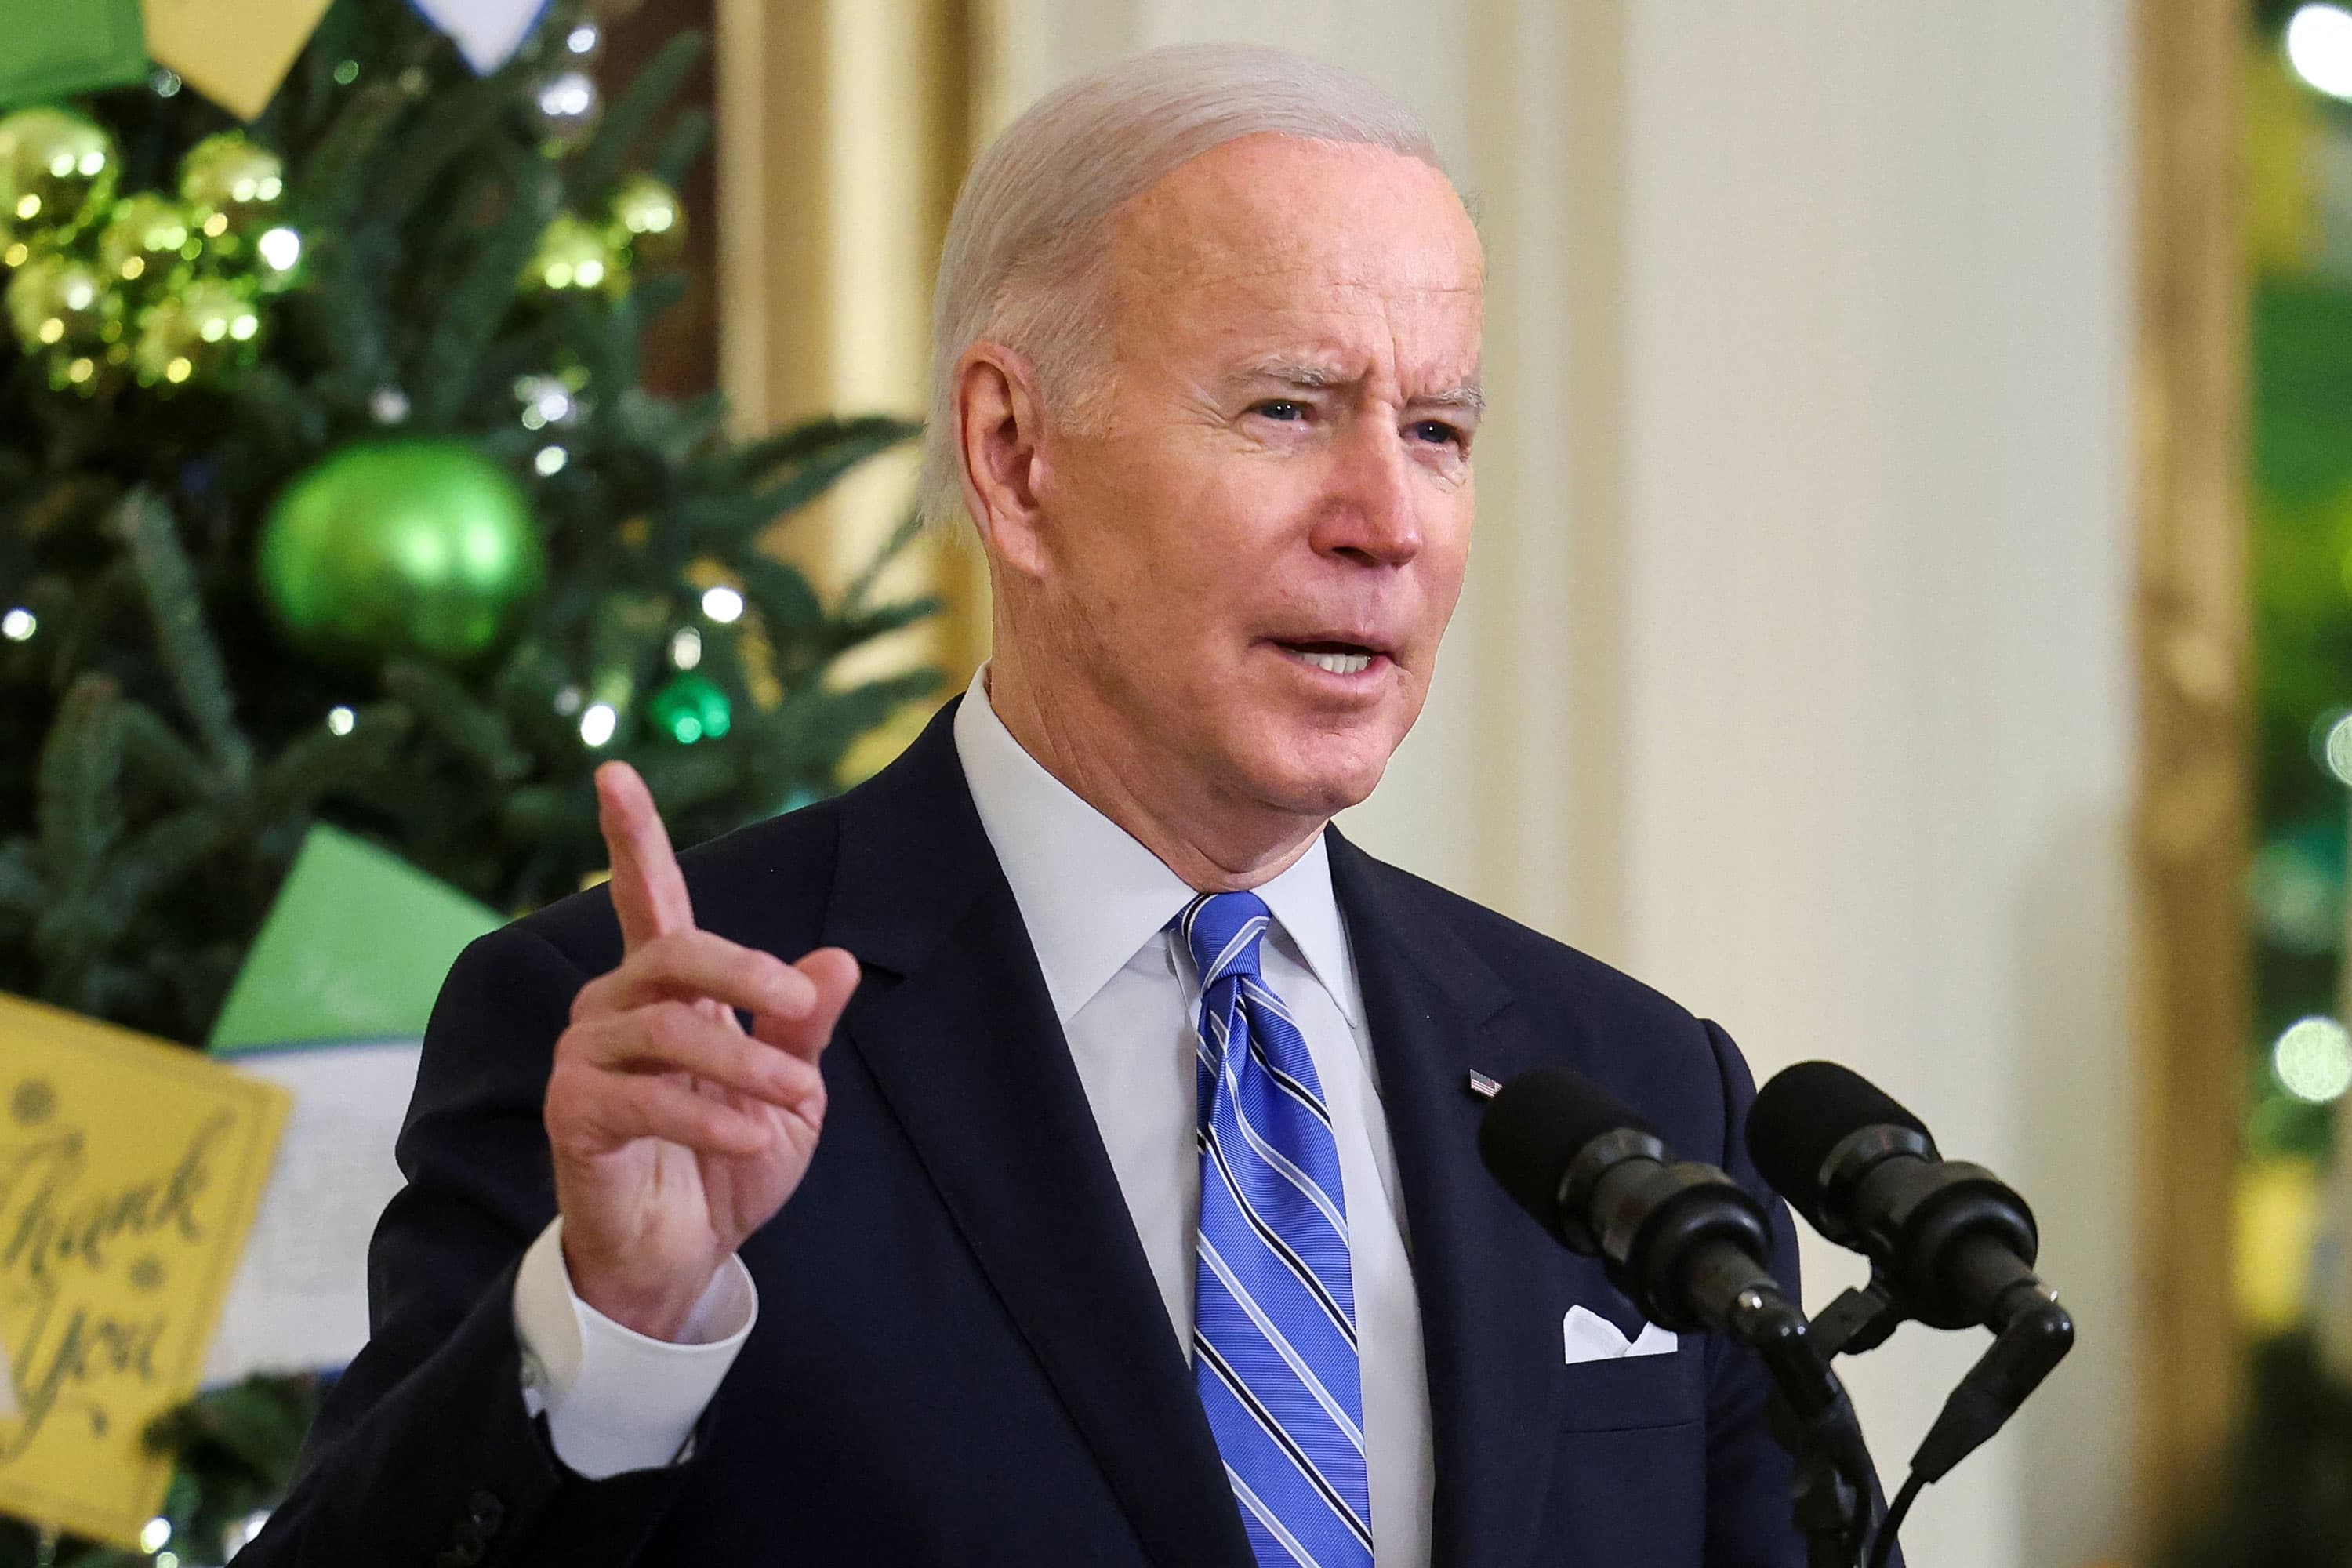 Biden to deliver Tuesday speech on omicron variant as Covid cases rise